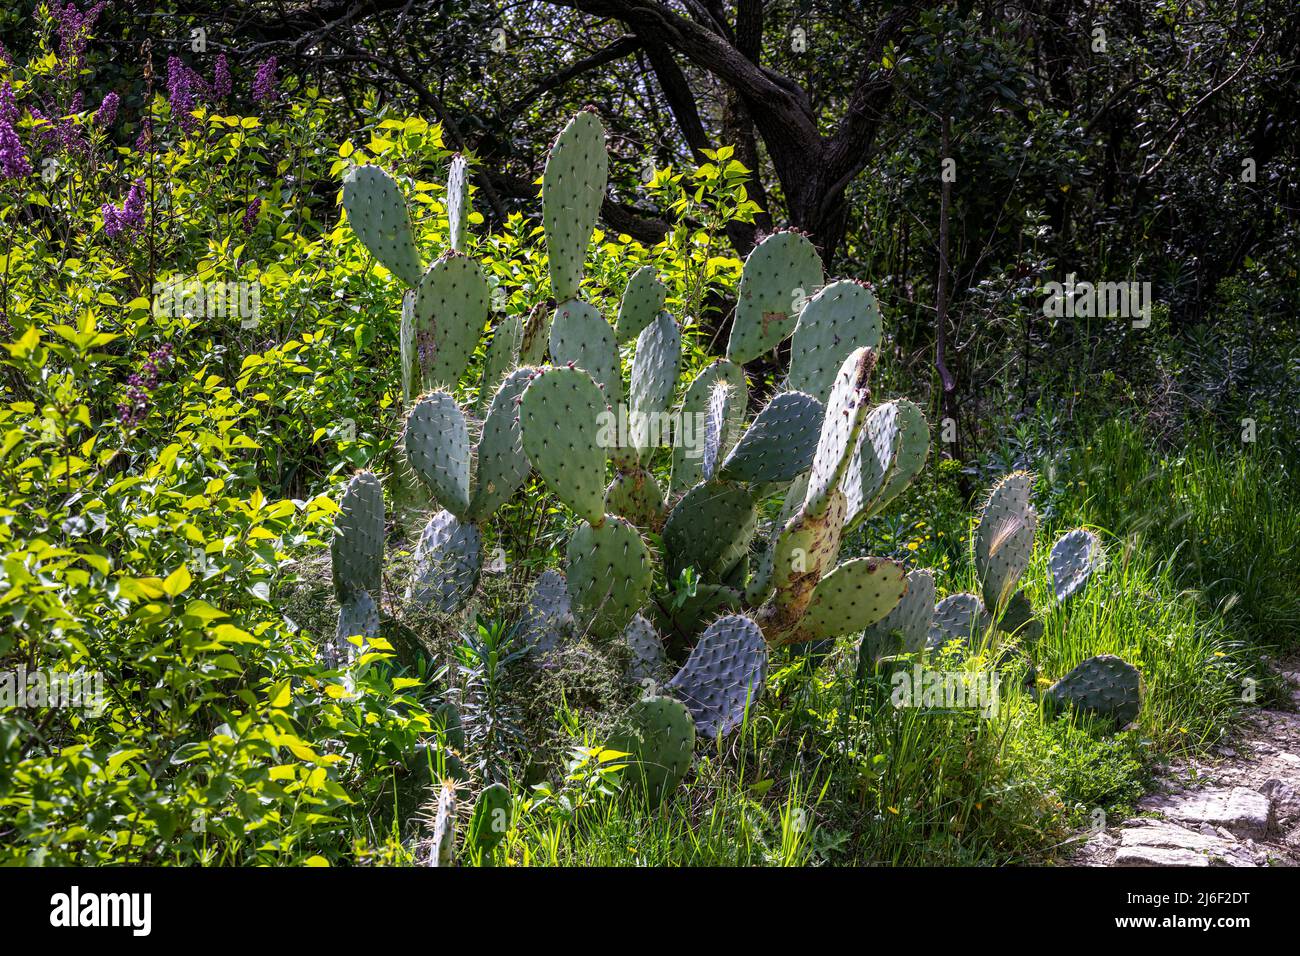 Prickly pear cactus or Opuntia ficus-indica in the south of France in spring Stock Photo